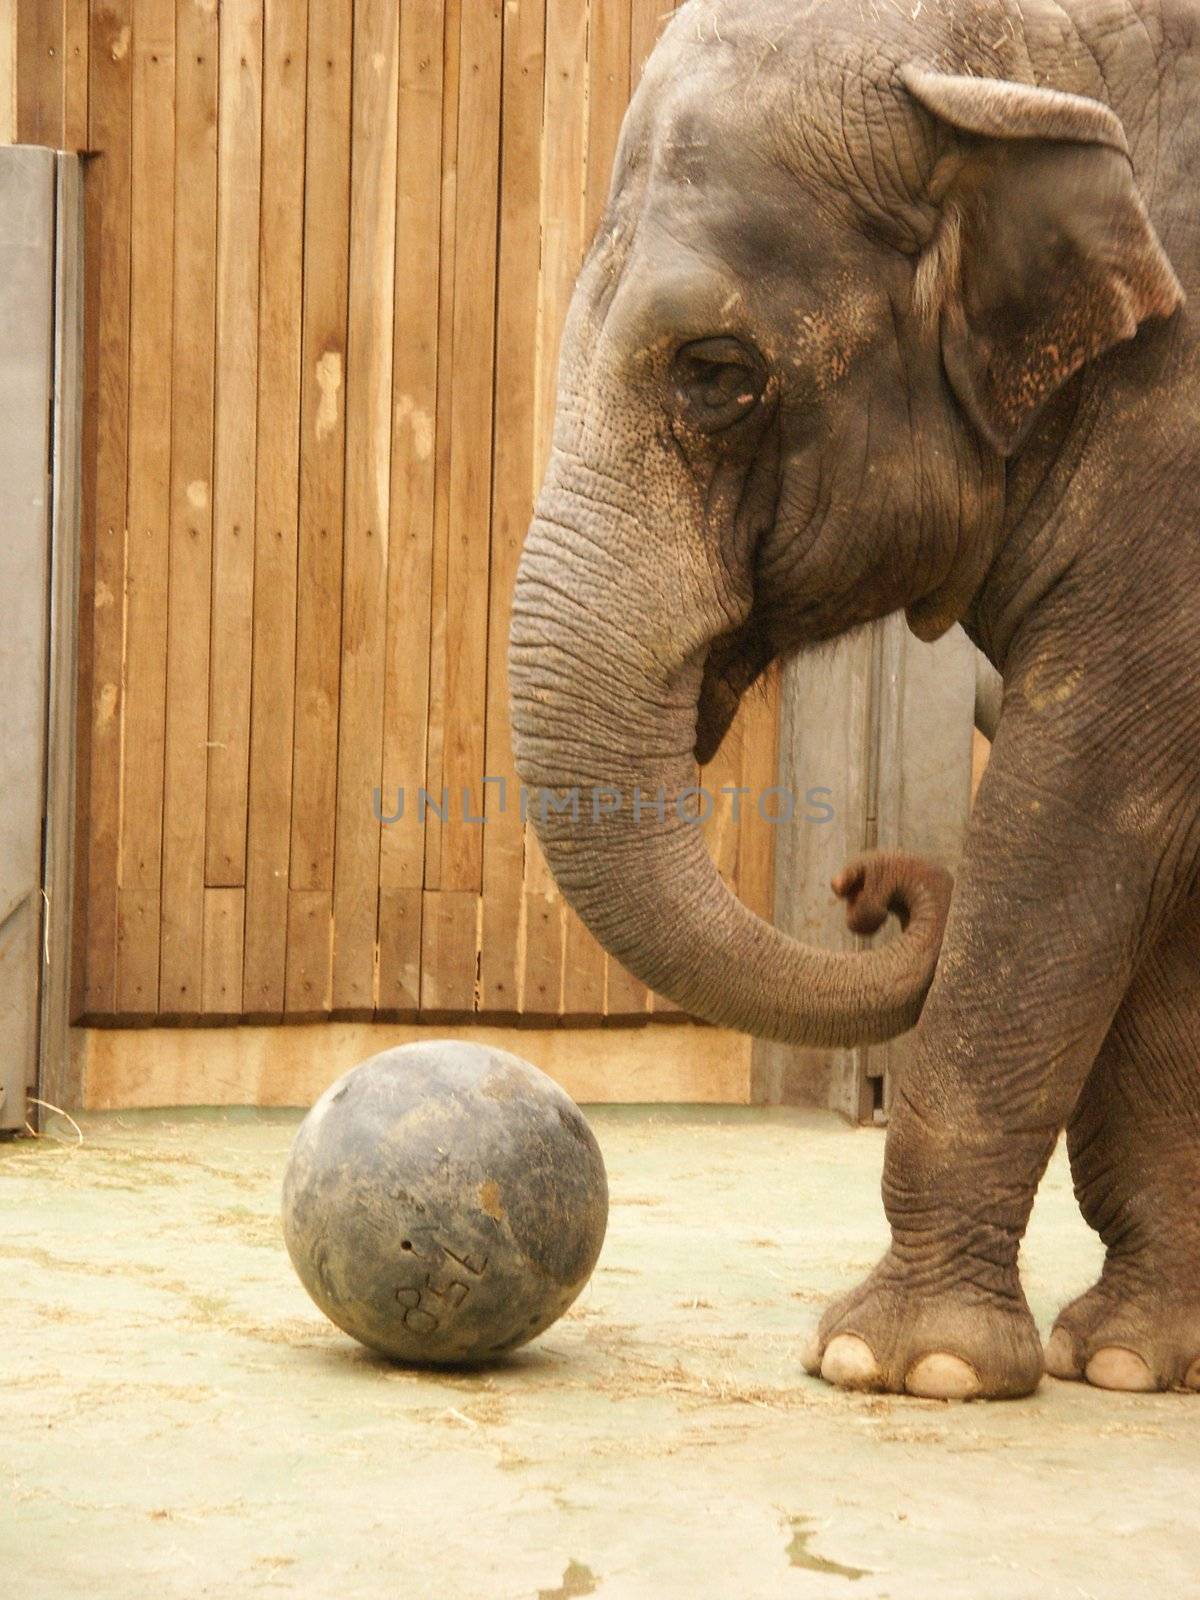 elephant in ostrava zoo plays with ball